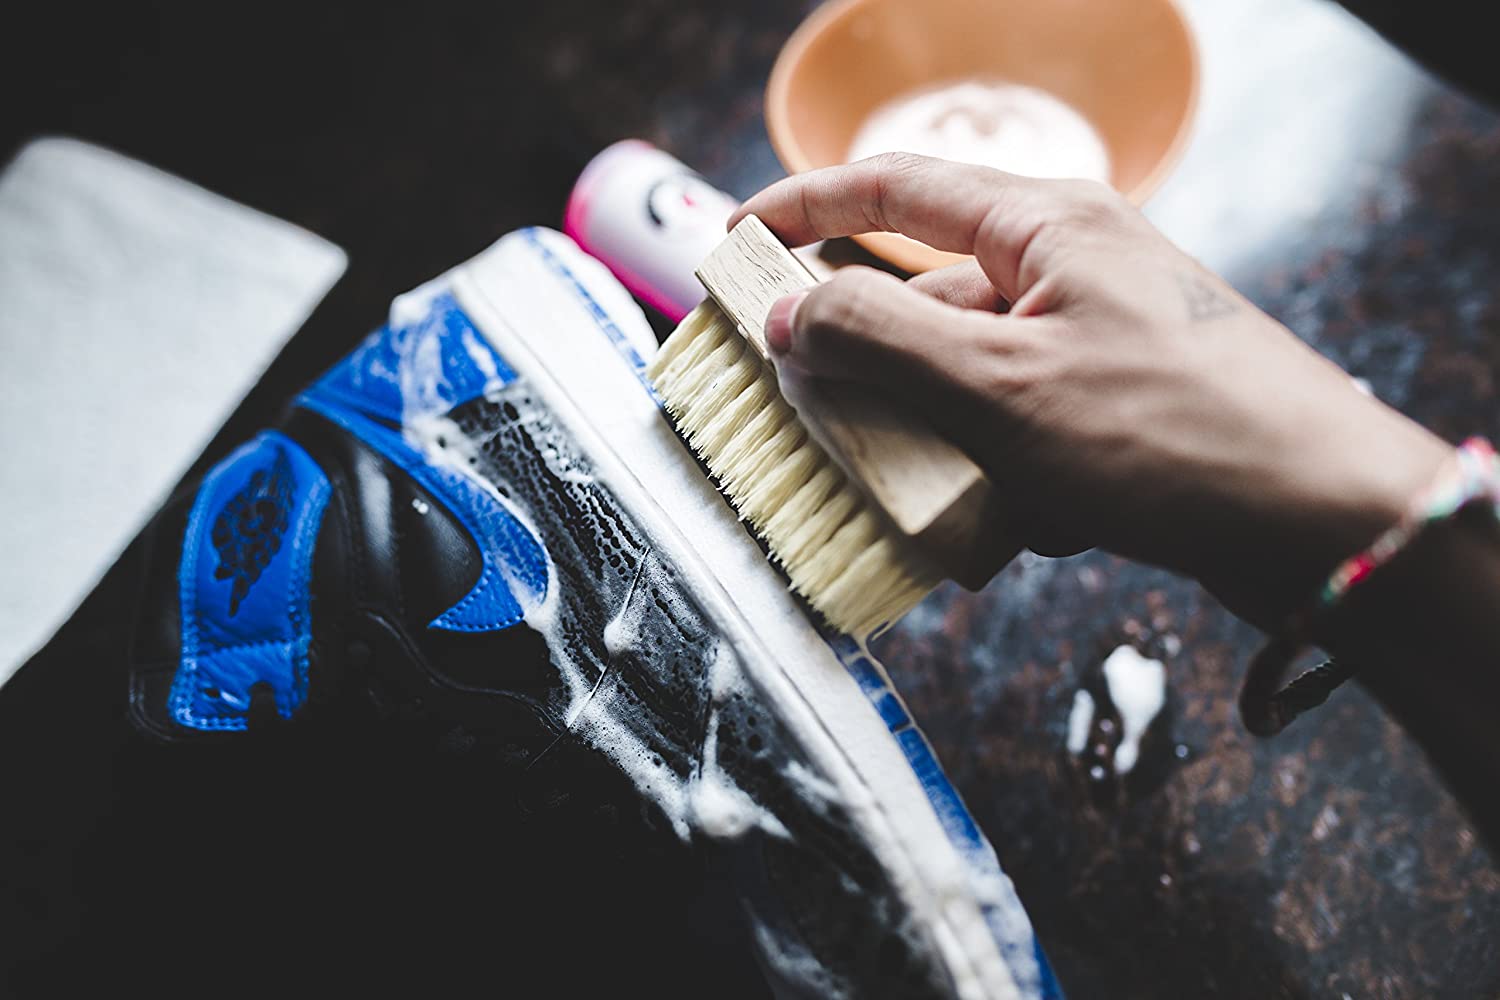 Keep your sneakers clean